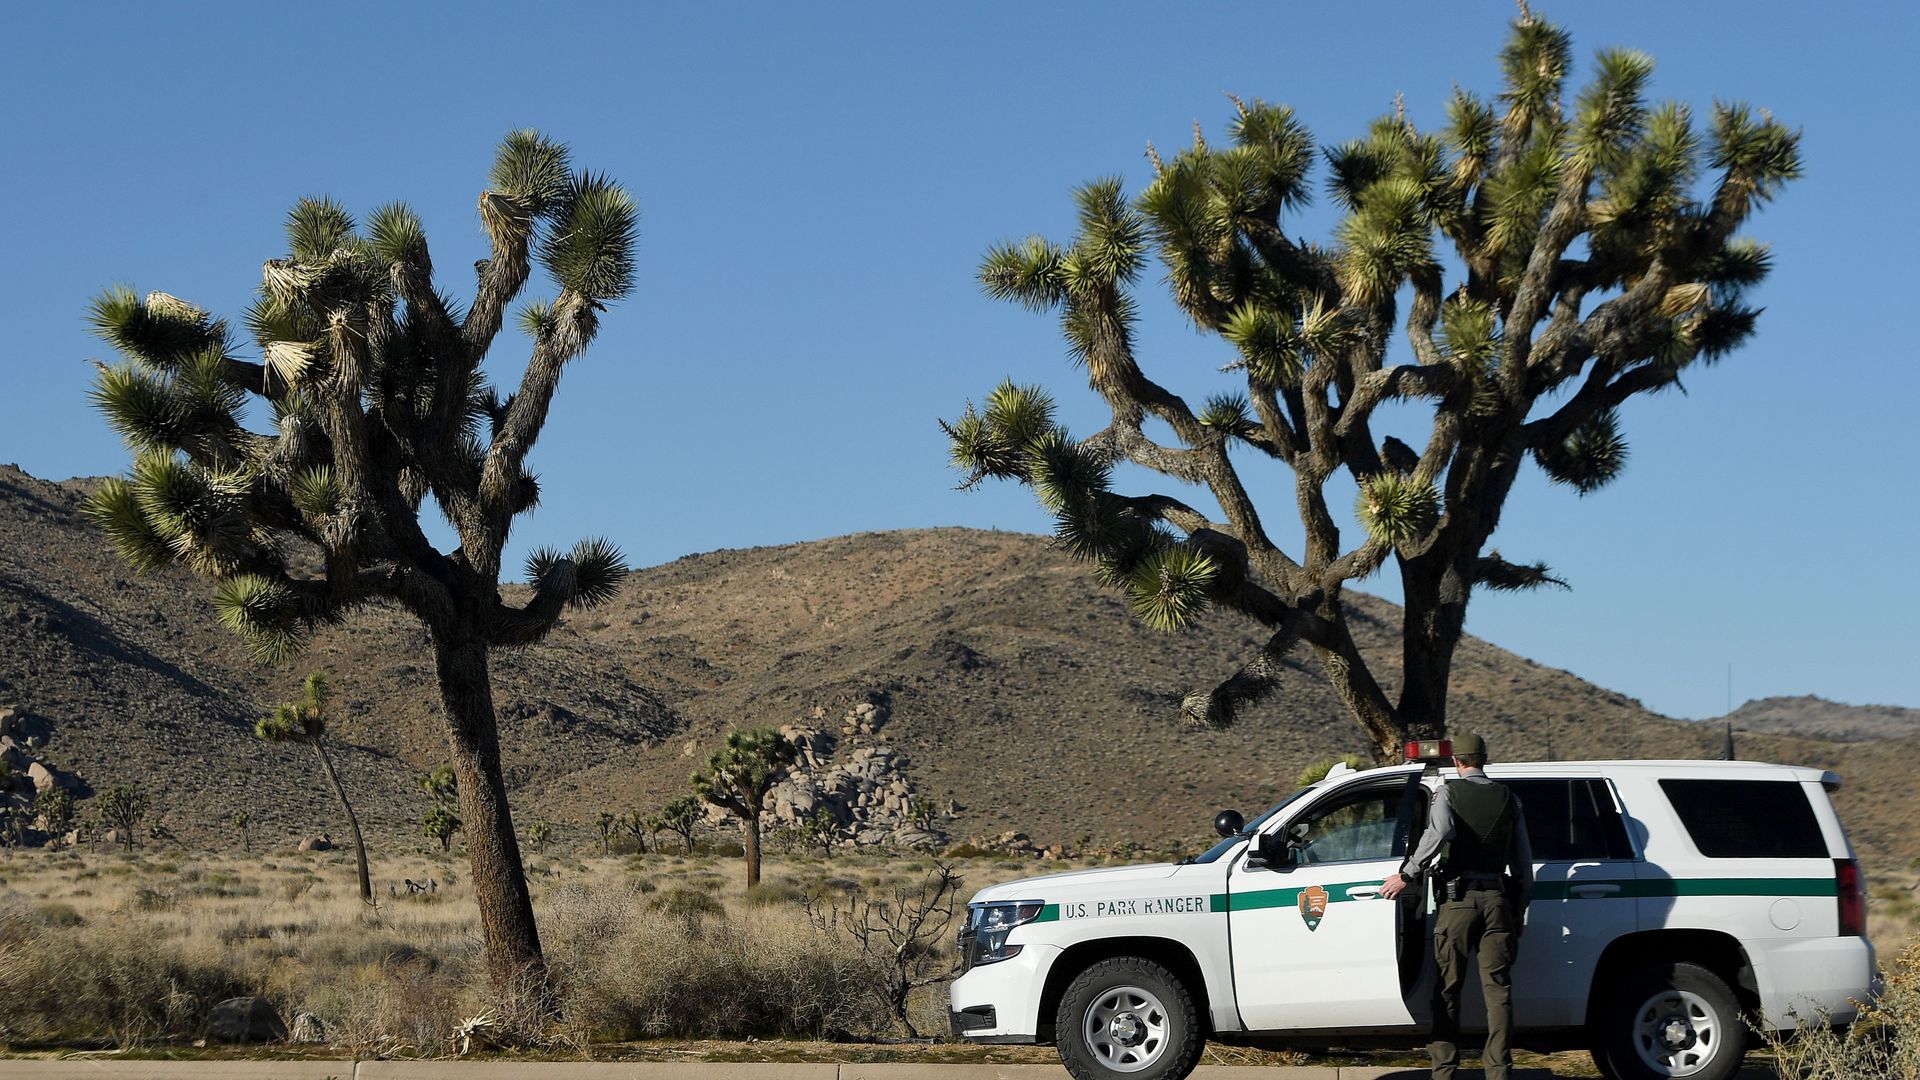 Joshua Trees and a U.S. National Park Service car and officer.